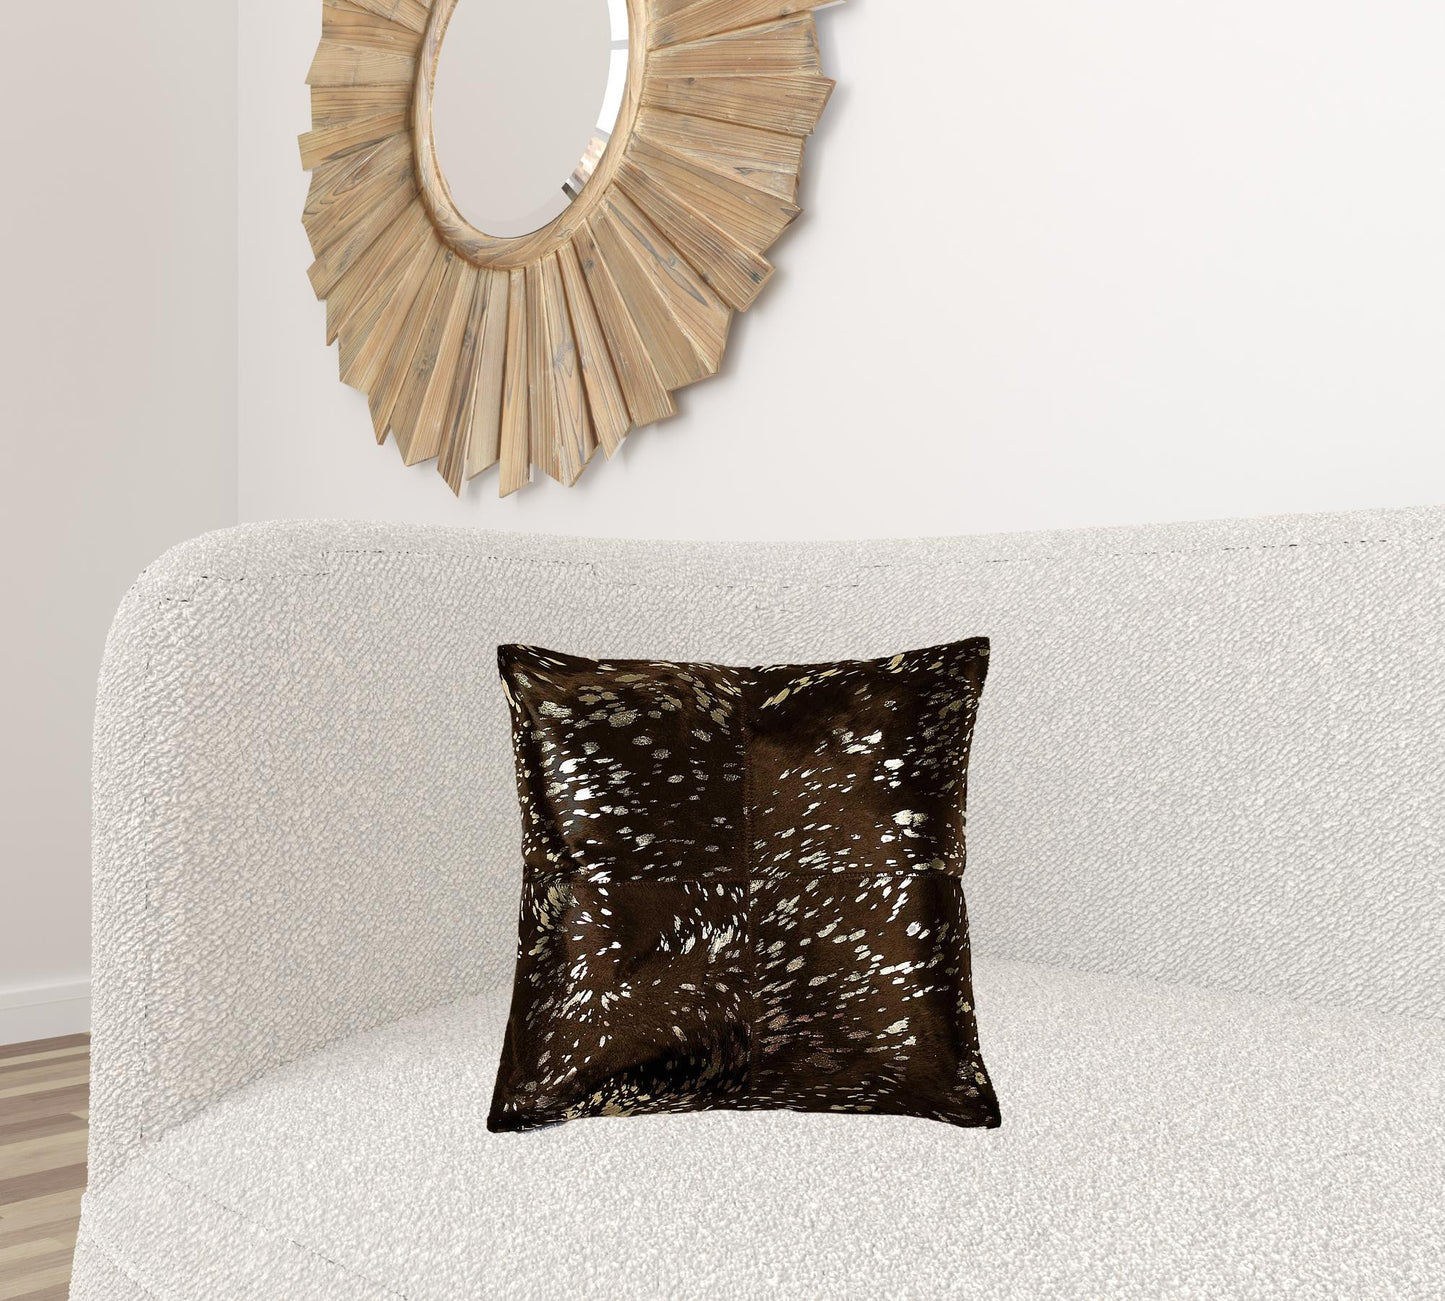 18" X 18" X 5" Gold And Chocolate Quattro  Pillow